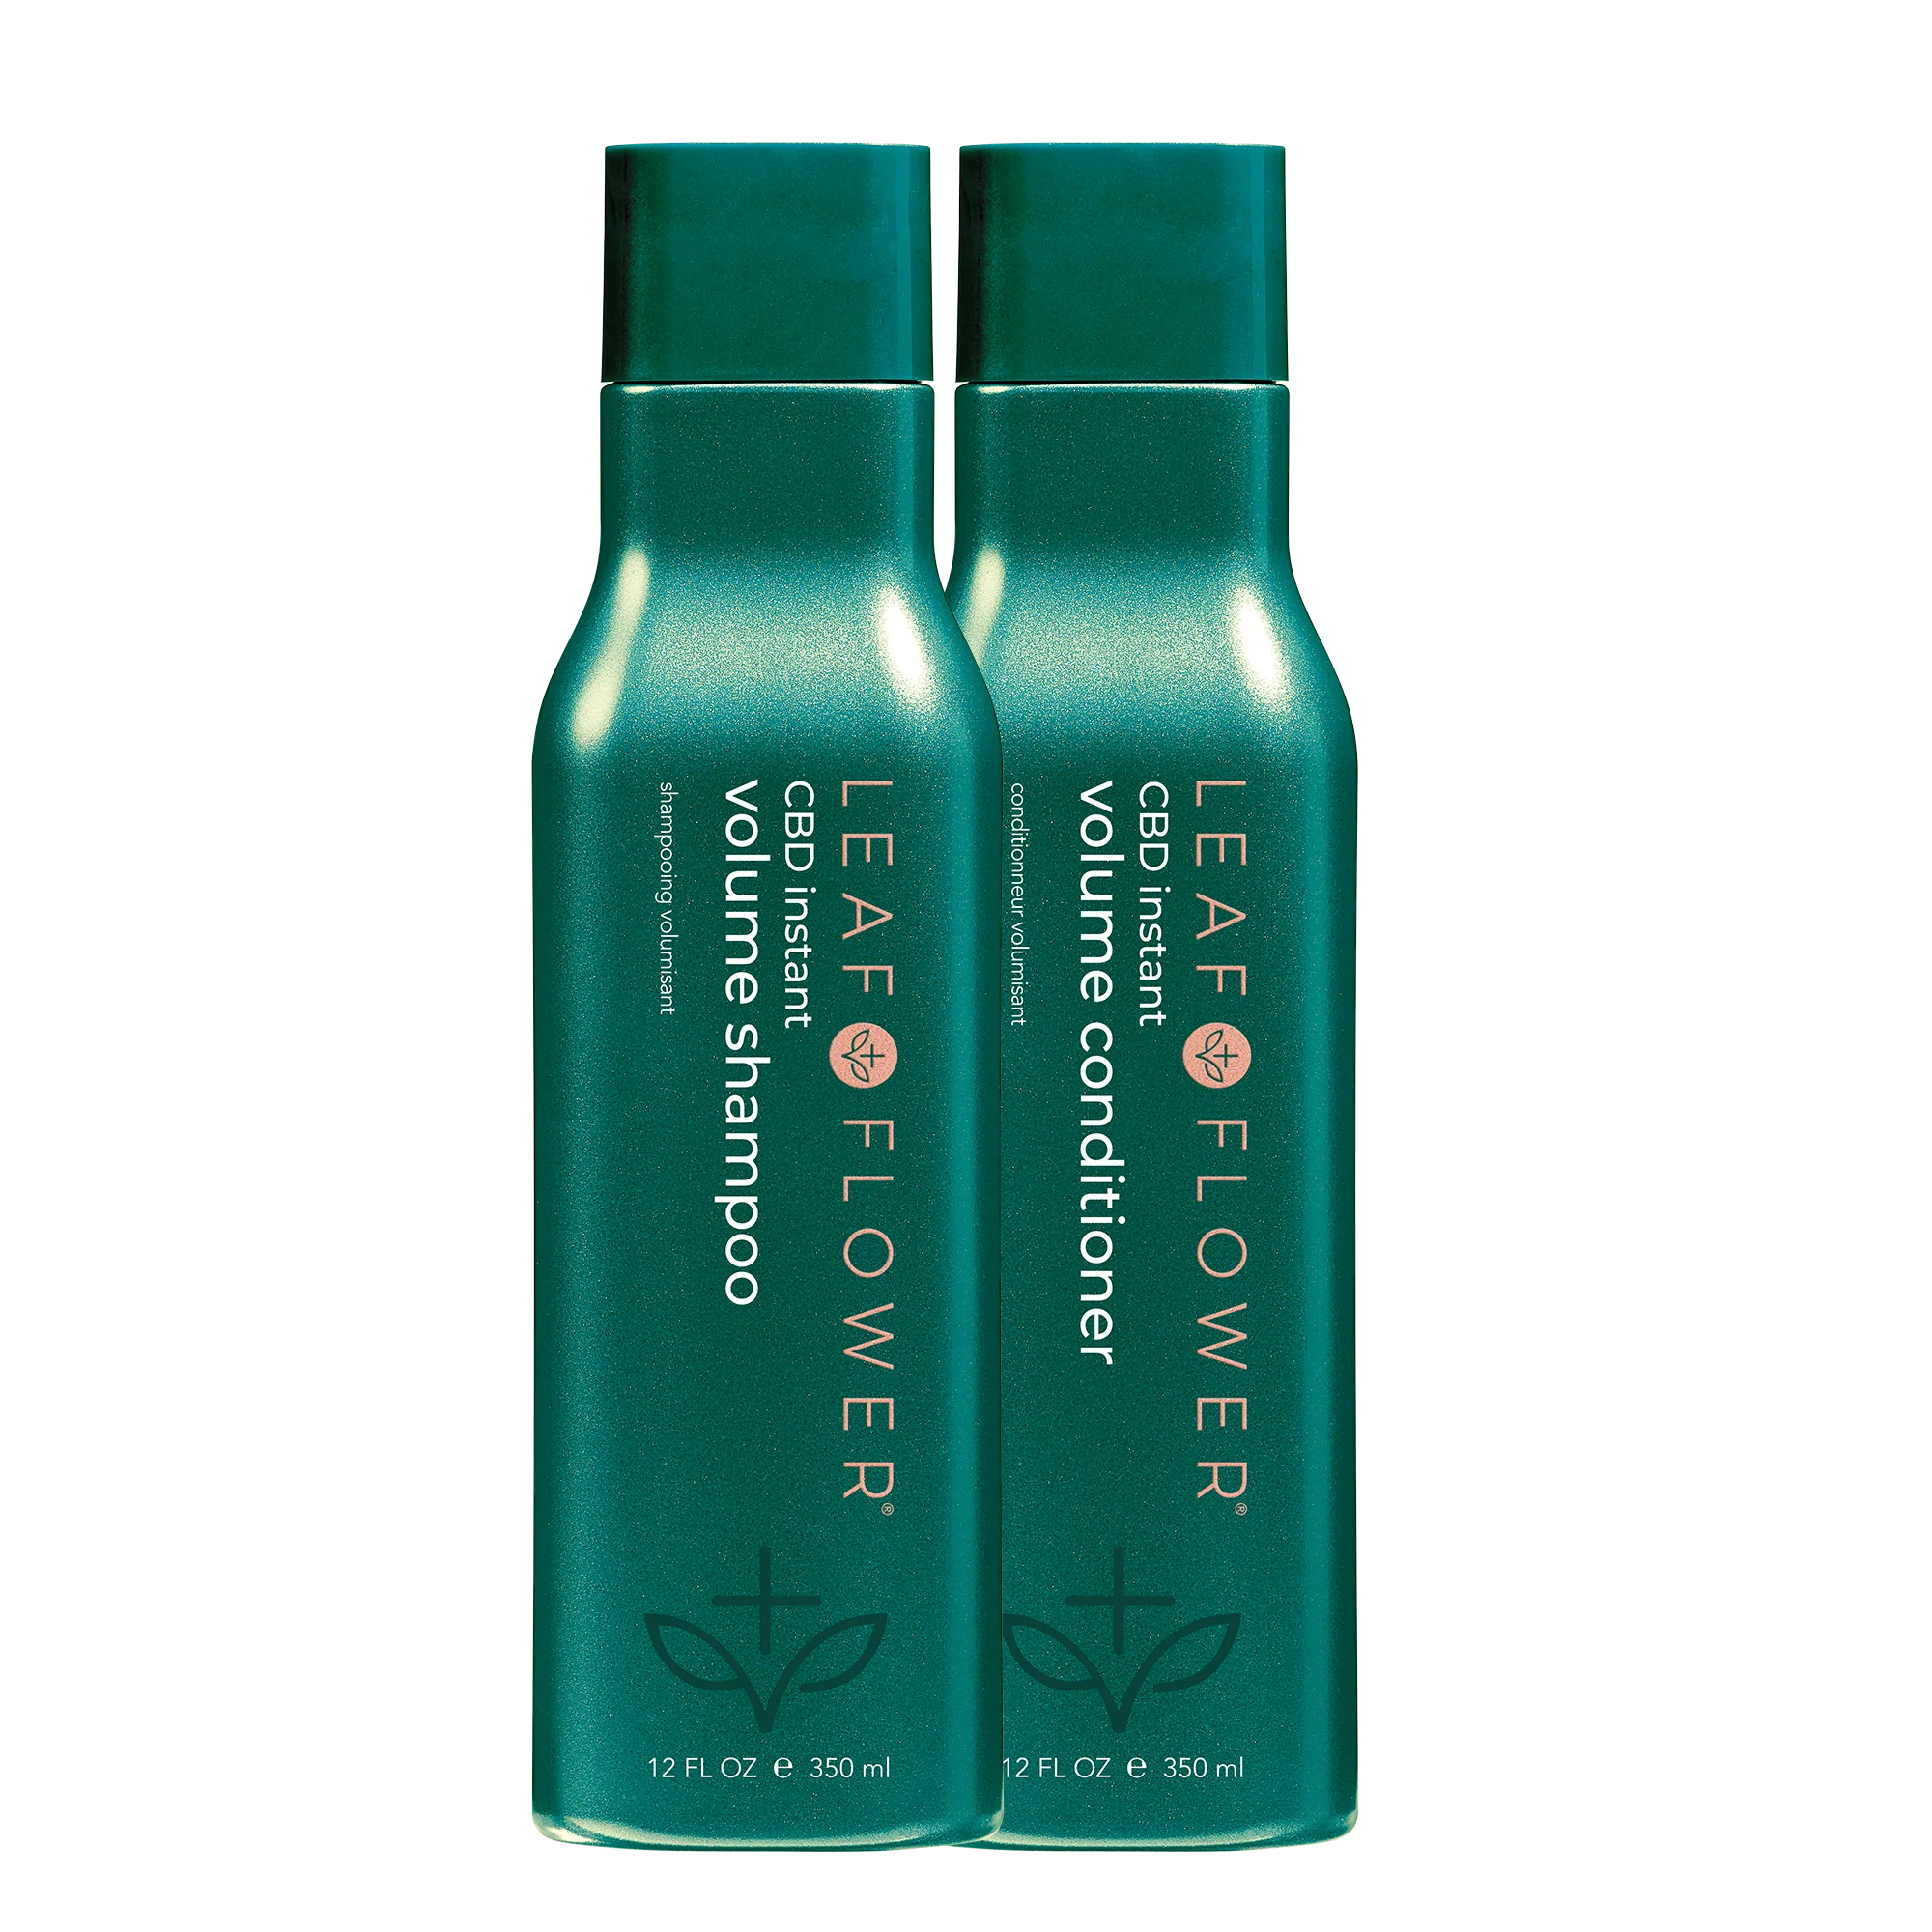 A bottle of LEAF and FLOWER Instant Volume Shampoo and Conditioner Duo for hair volume and a bottle of LEAF and FLOWER Instant Volume Shampoo and Conditioner Duo for a thicker appearance.